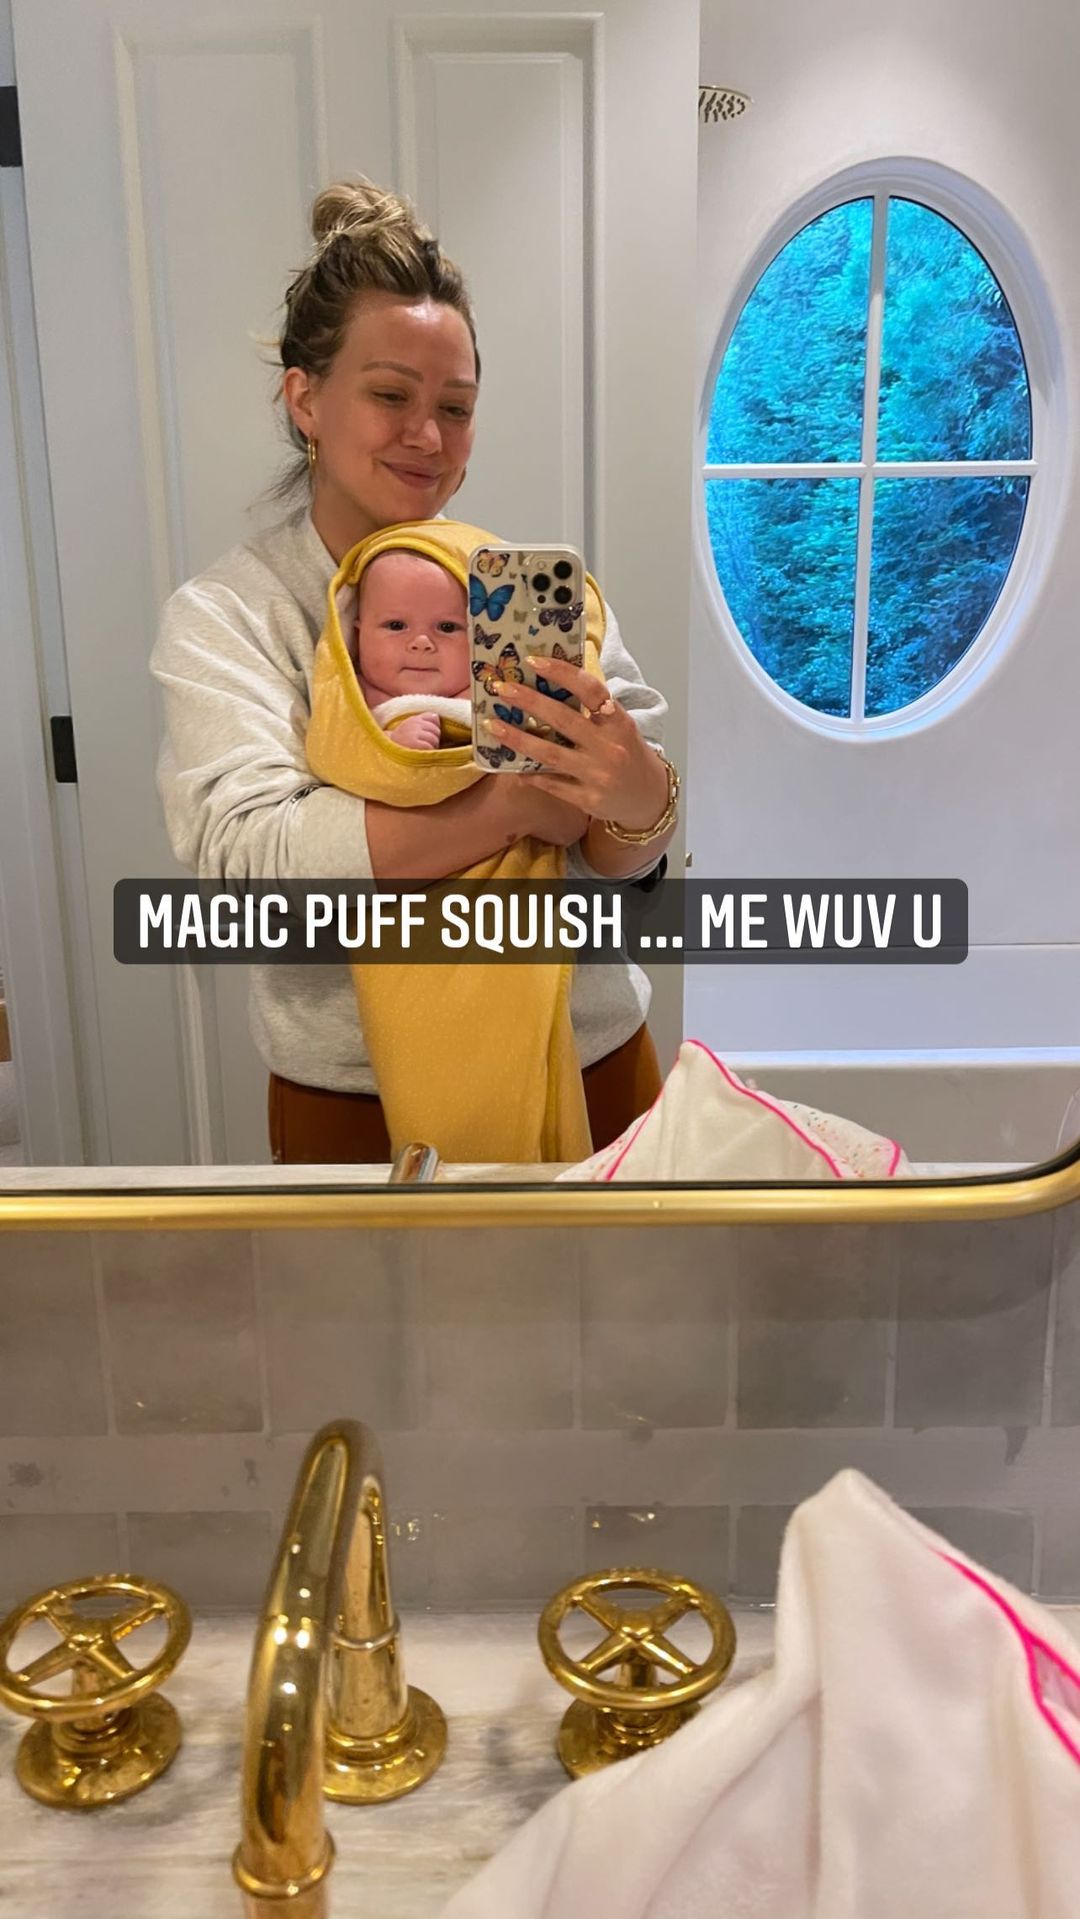 Hilary Duff and Matthew Koma's Youngest Daughter's Baby Album Towel Time